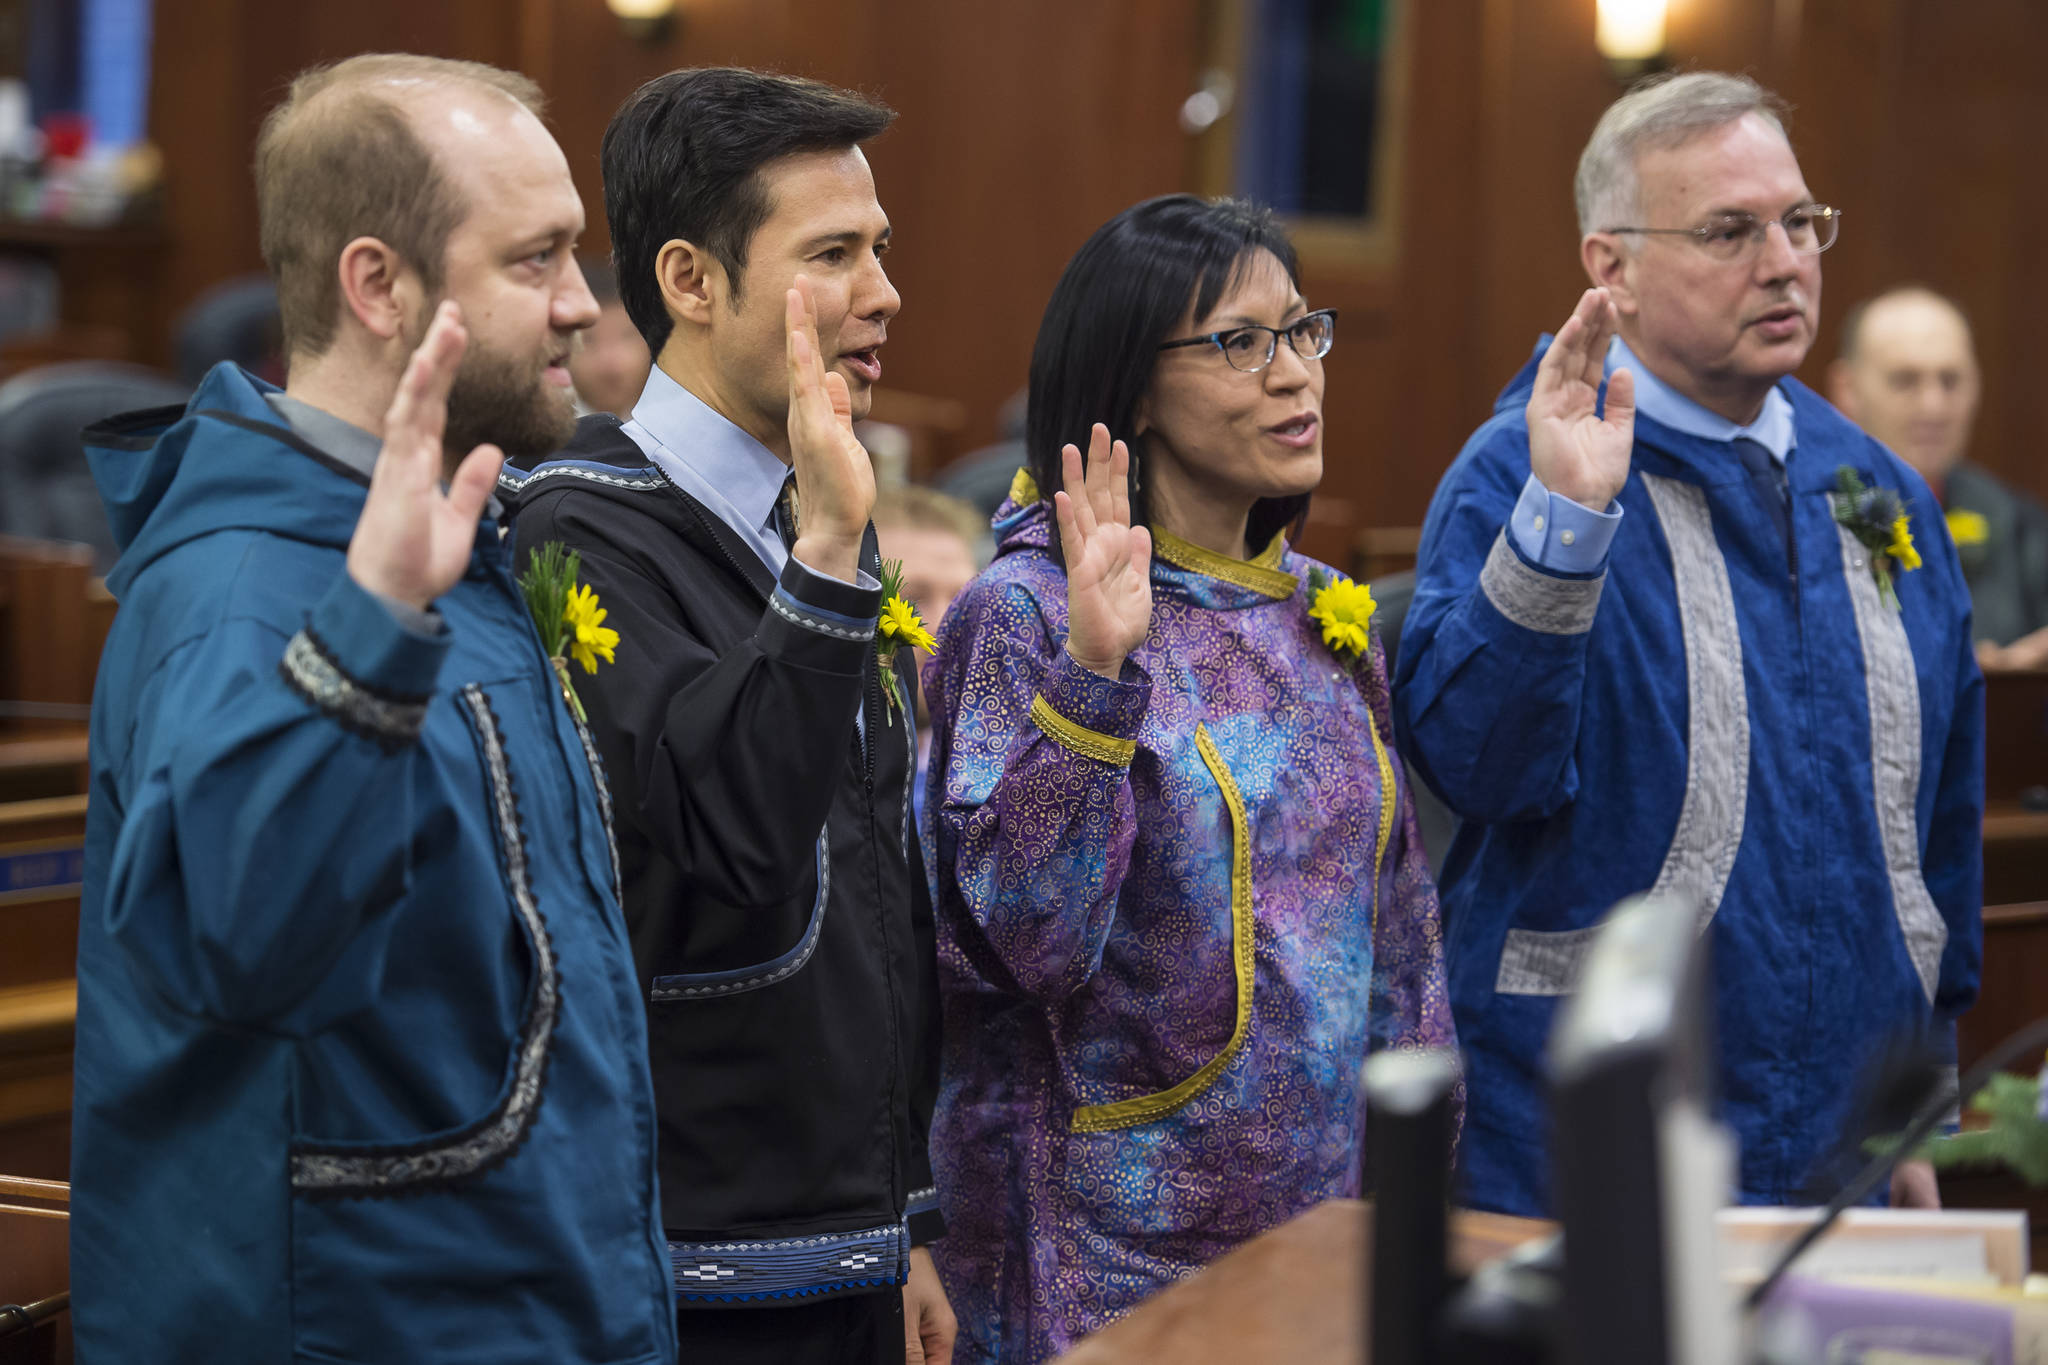 Rep. John Lincoln, D-Kotzebue, left, Rep. Neal Foster, D-Nome, Rep. Tiffany Zulkosky, D-Bethel, and Rep. Bryce Edgmon, D-Dillingham, right, wear kuspuks as they are sworn into their House seats on Tuesday, Jan. 15, 2019. (Michael Penn | Juneau Empire)